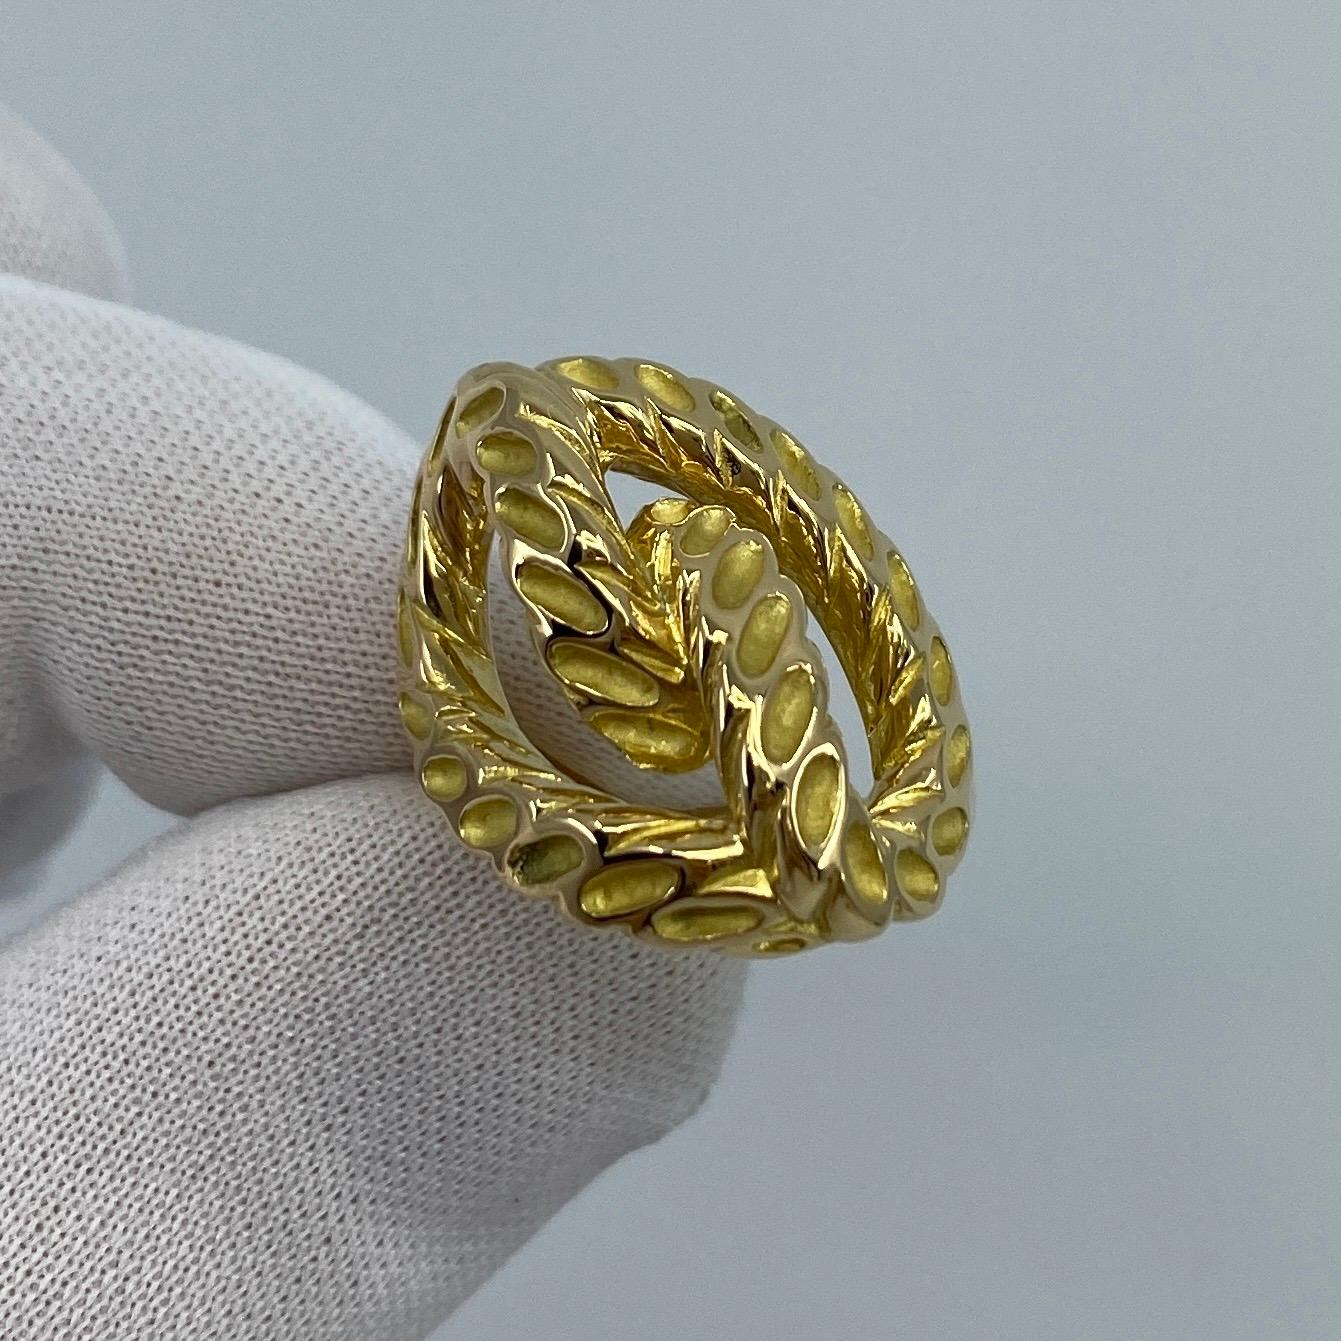 Rare Vintage Van Cleef & Arpels 18k Yellow Gold Braid Rope Motif Ring with Box For Sale 6